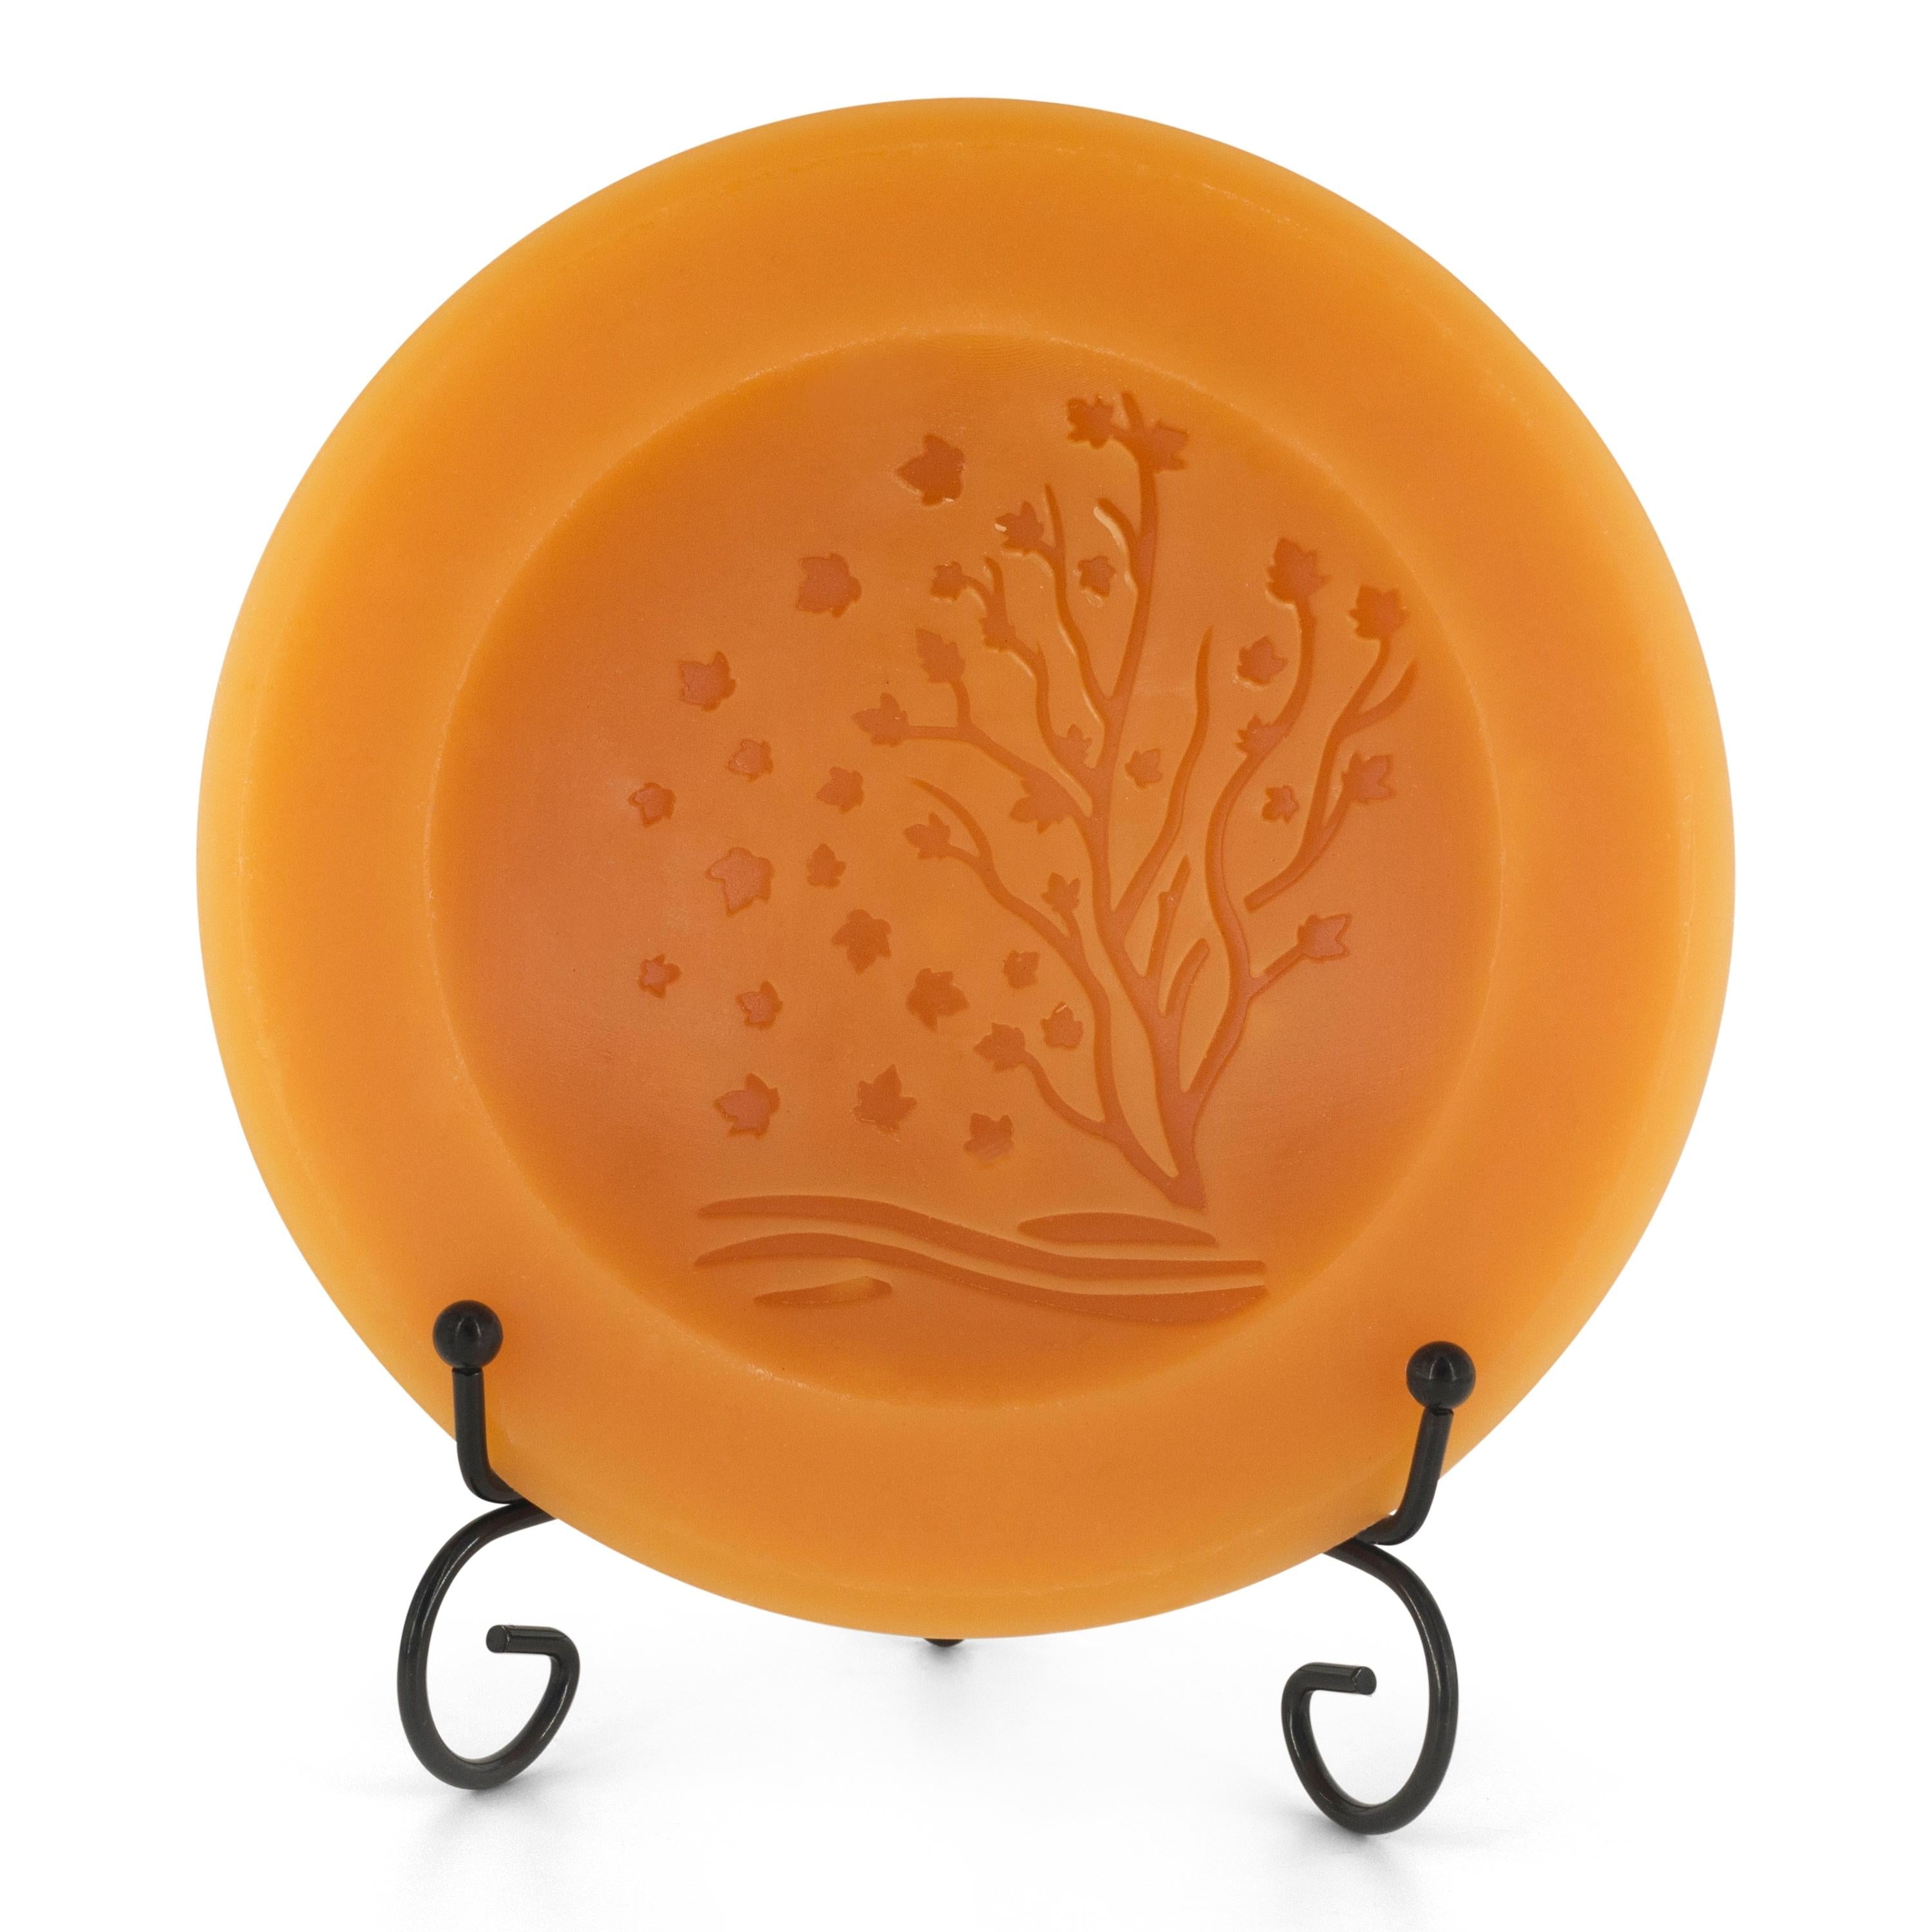 Spiced Pumpkin Vanilla 7" Scented Vessel w/ Stand (Fall Tree) by Scented Vessel